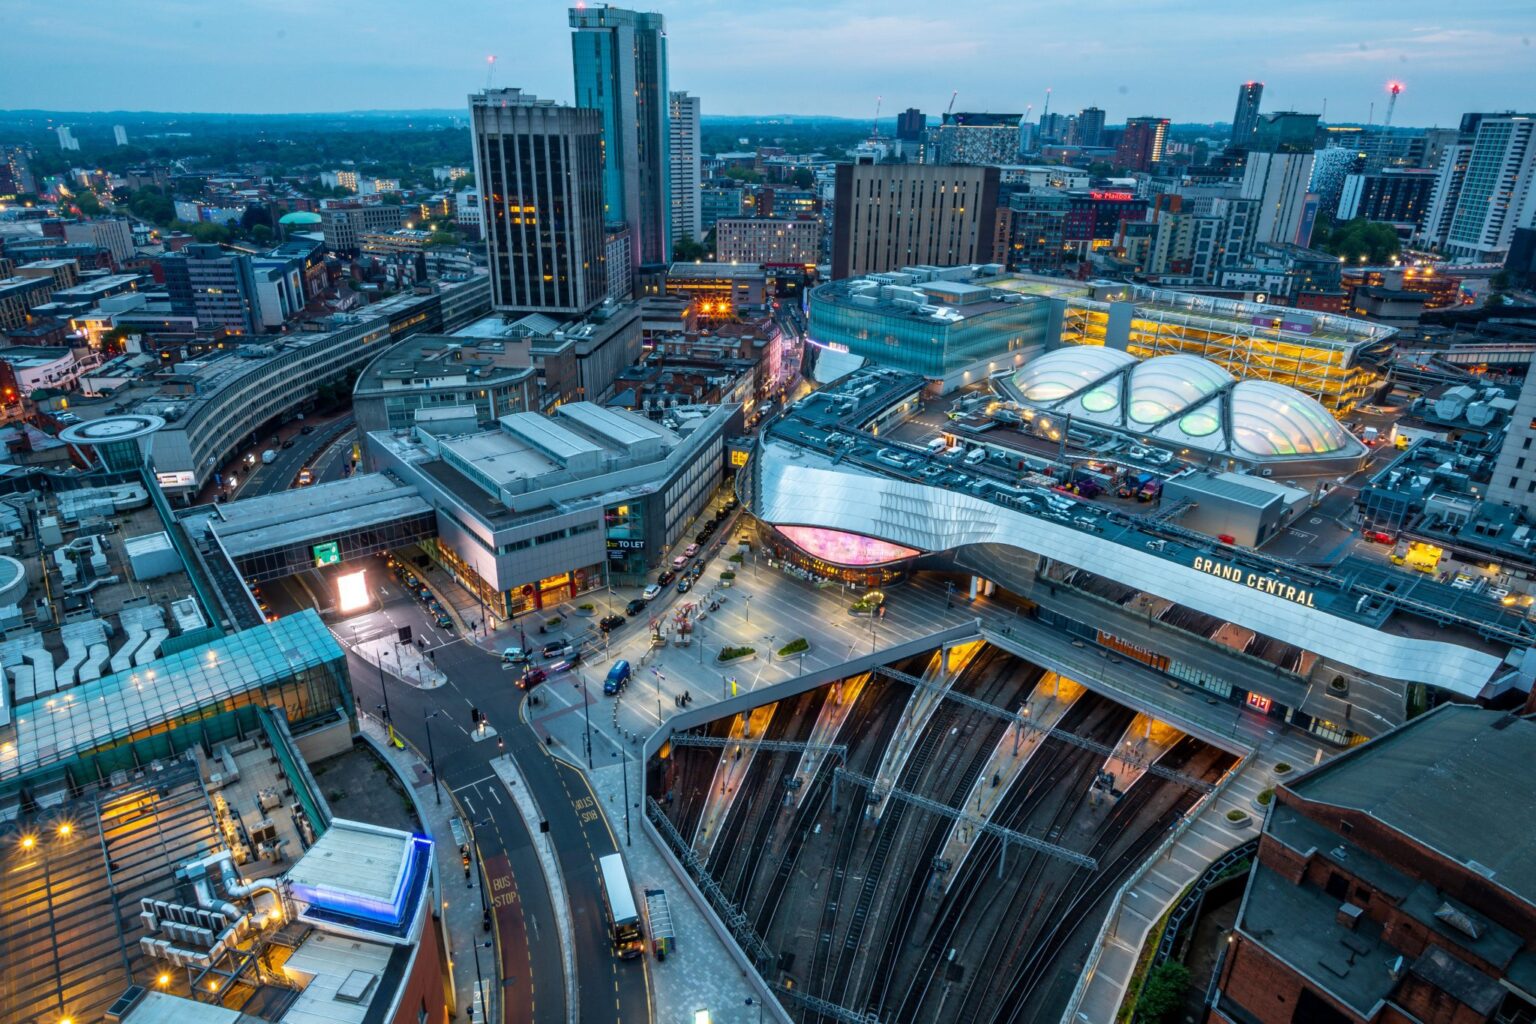 An aerial view of the city of Birmingham, showing modern properties and transport links